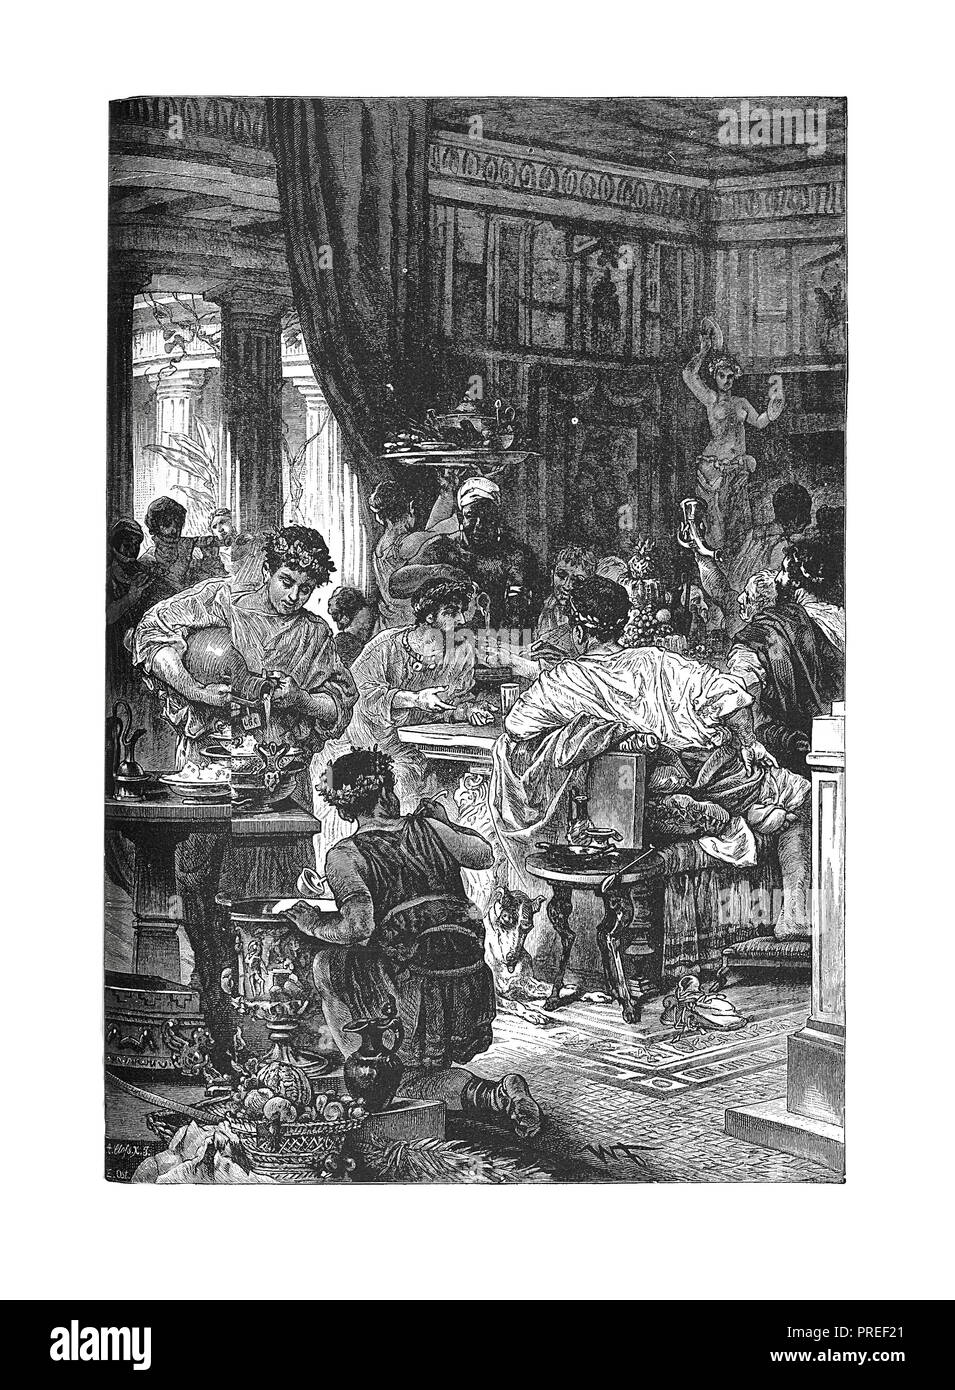 Original artwork of a scene of a romen banquet. Published in A pictorial history of the world's great nations: from the earliest dates to the present  Stock Photo